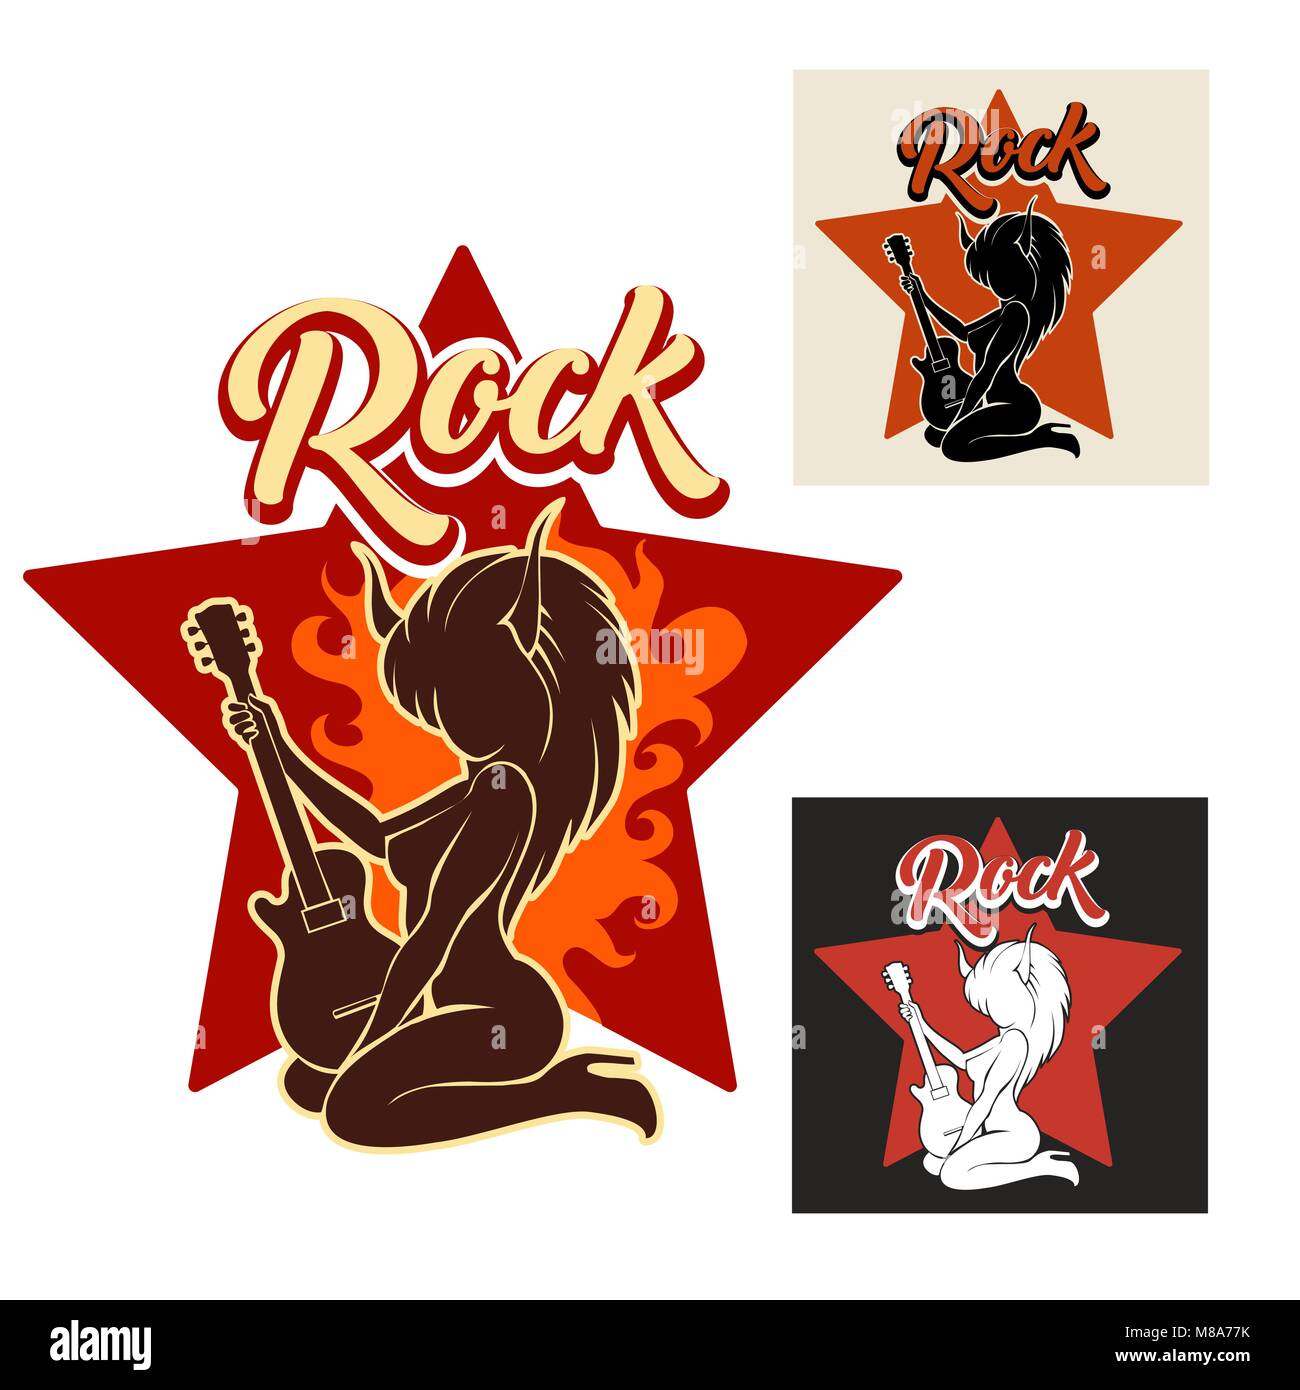 Silhouette of girl with horns playing electric guitar in flame against star. Rock music Emblem set. Vector illustration. Stock Vector